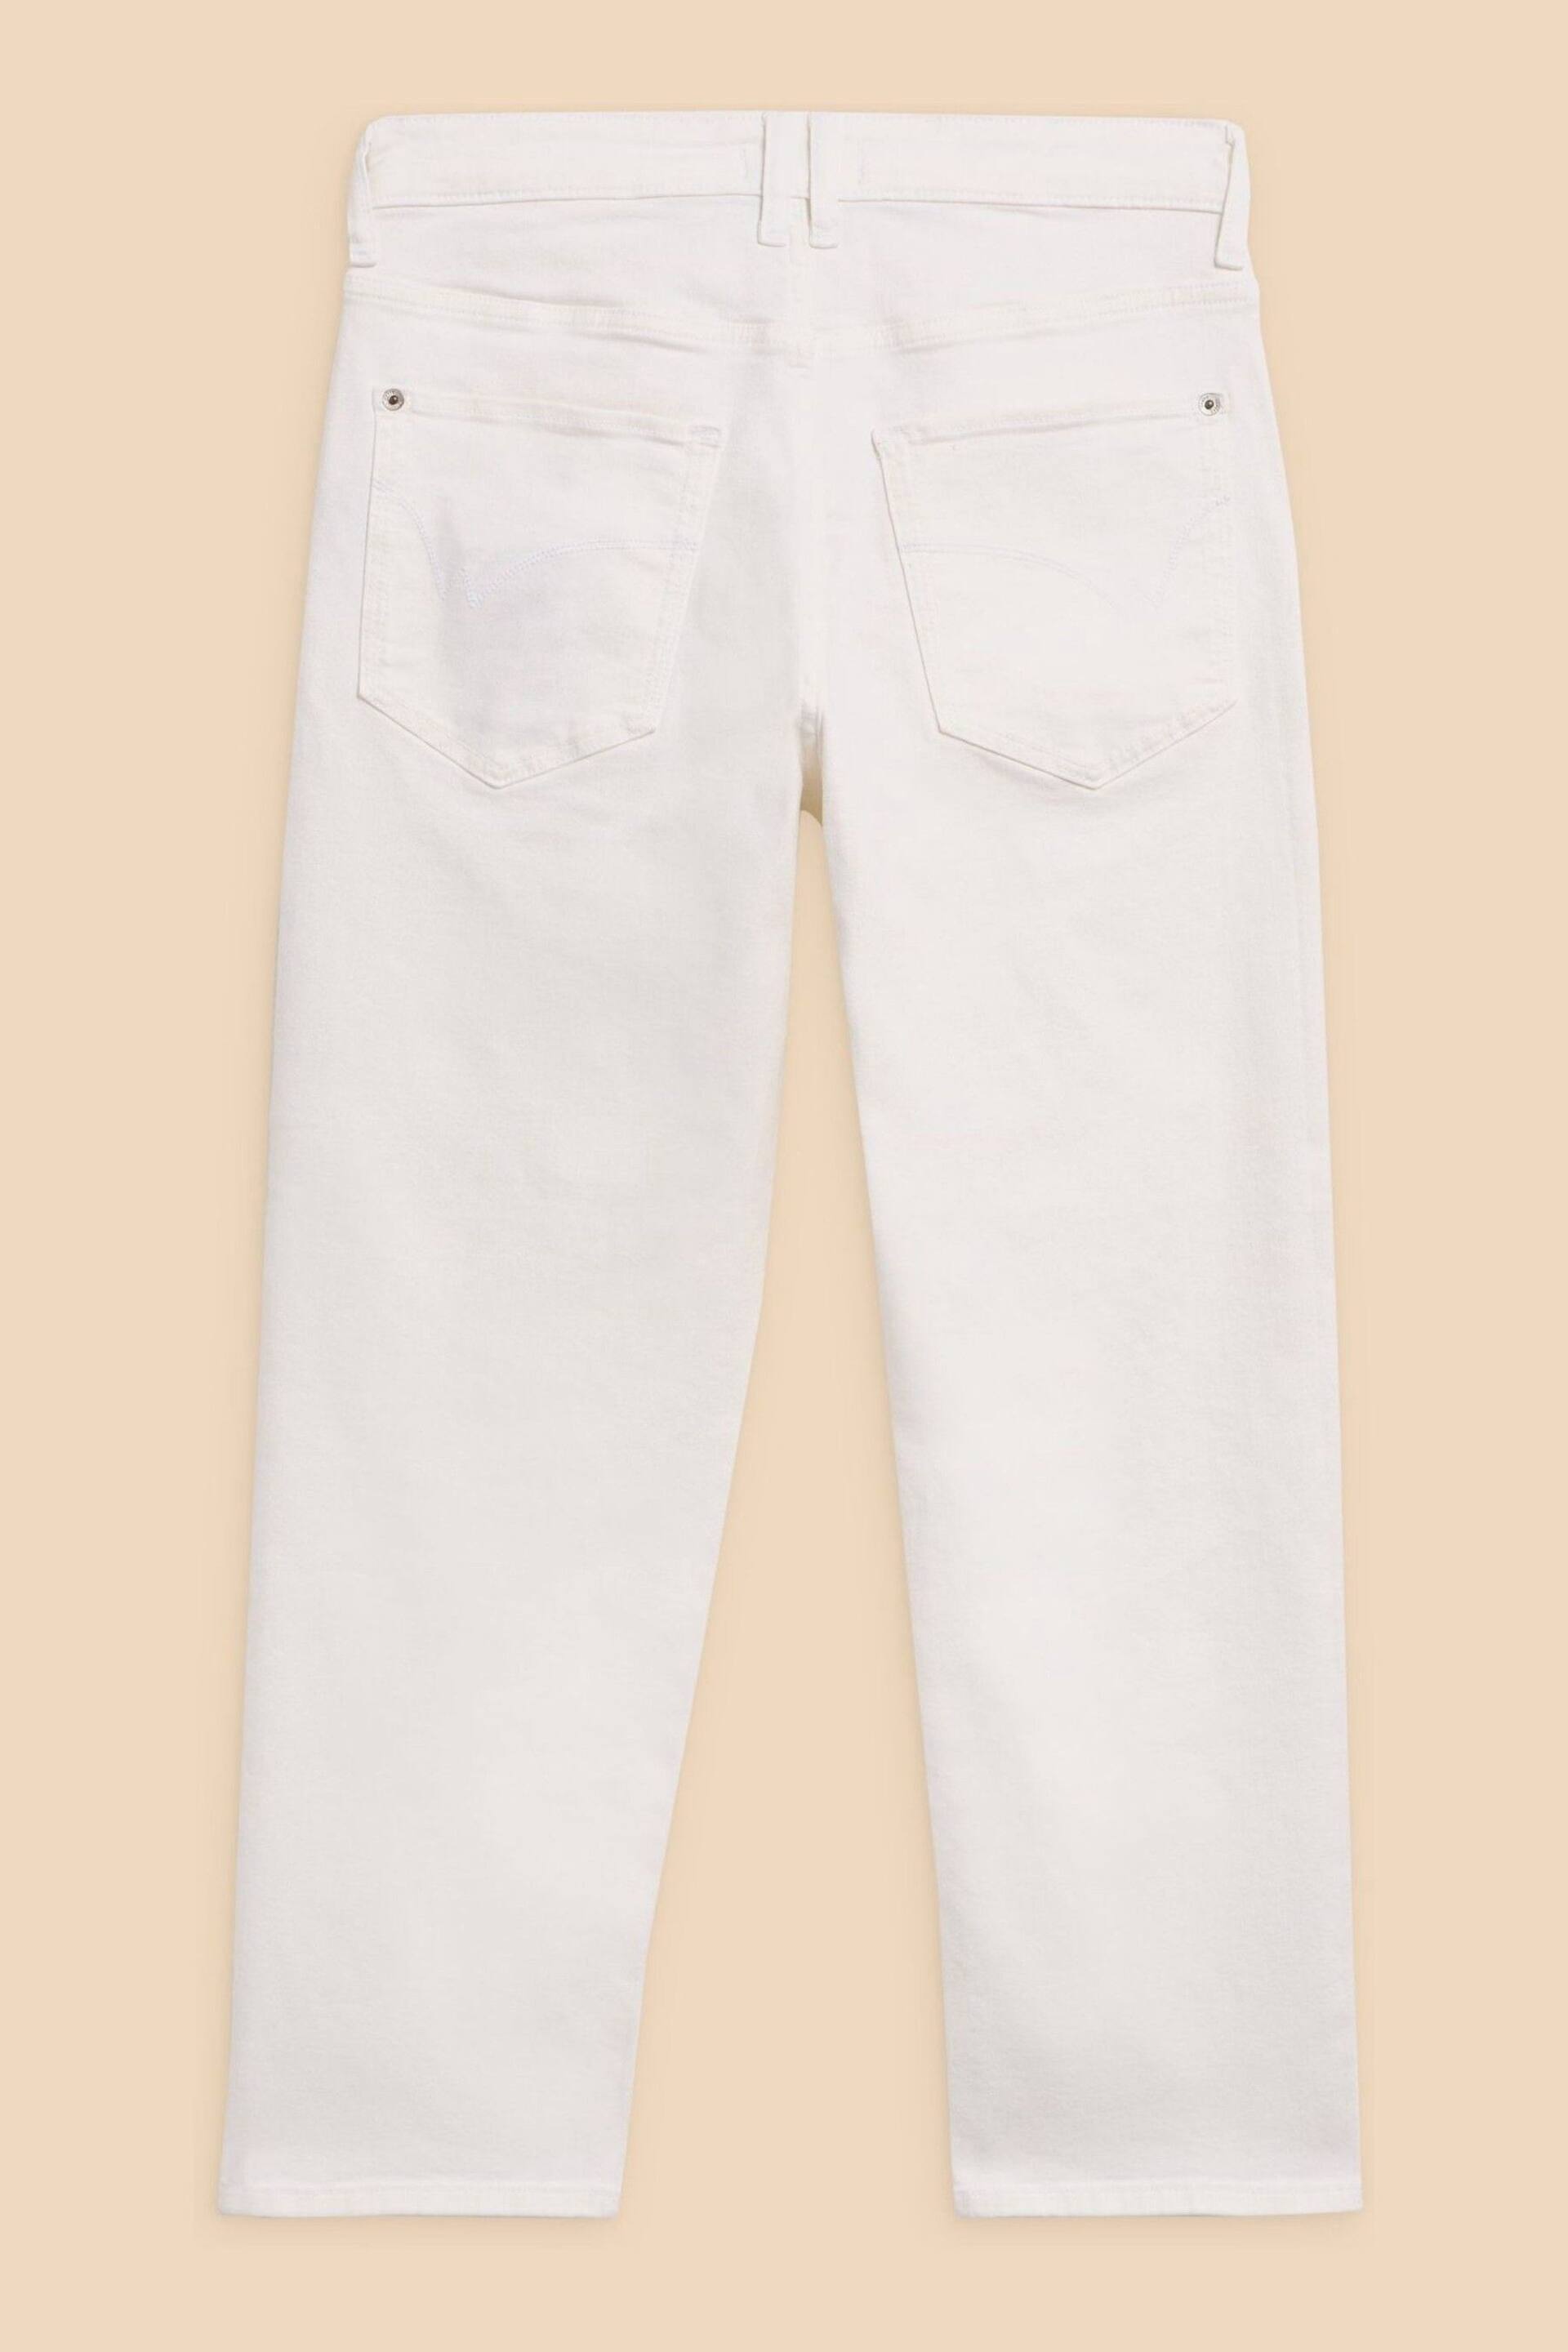 White Stuff Natural Blake Straight Crop Jeans - Image 6 of 7